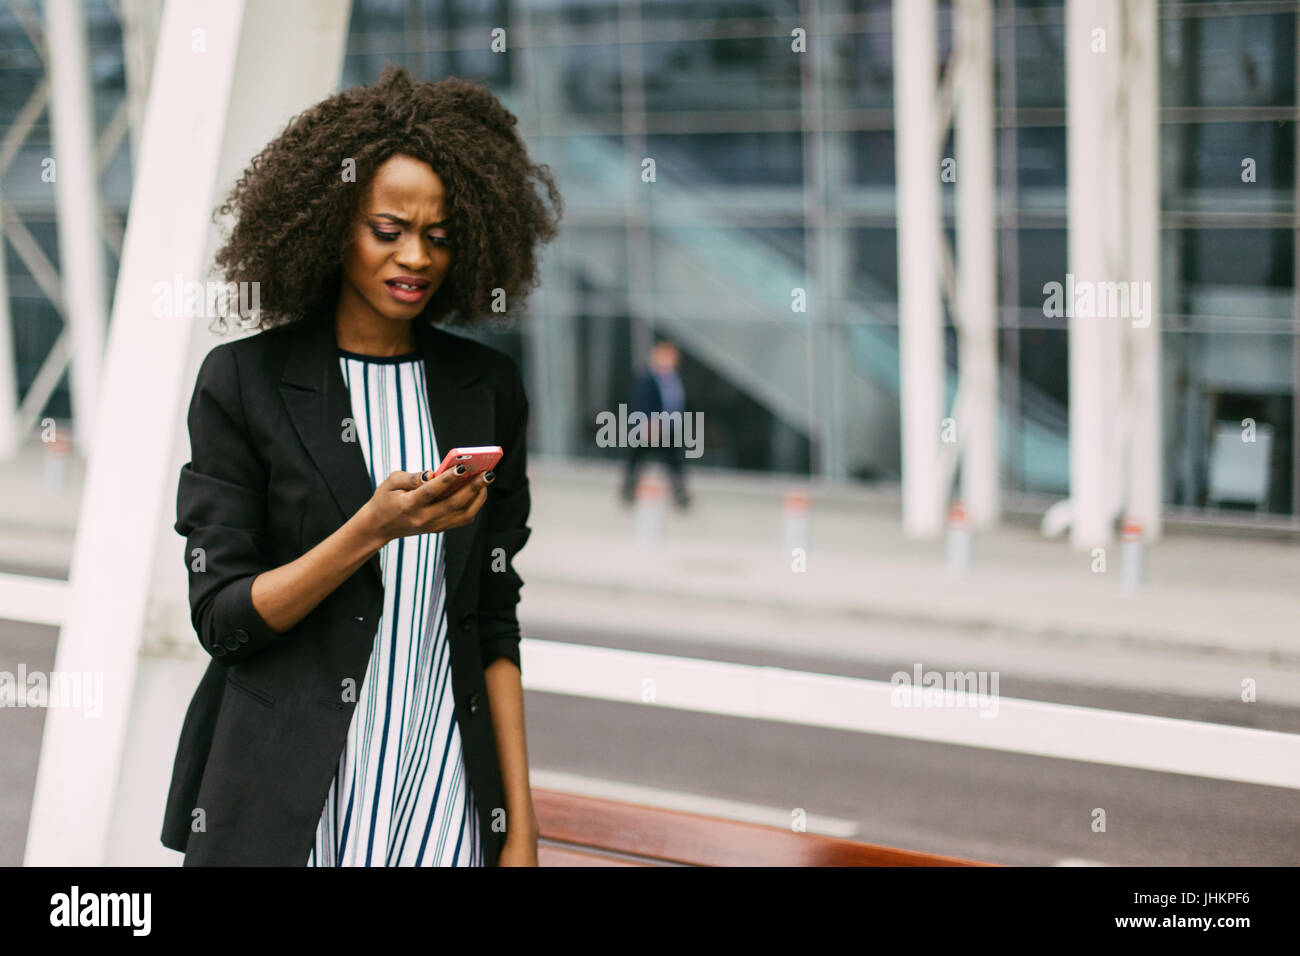 Upset afro-american woman is looking at the mobile phone. Close-up portrait. Stock Photo